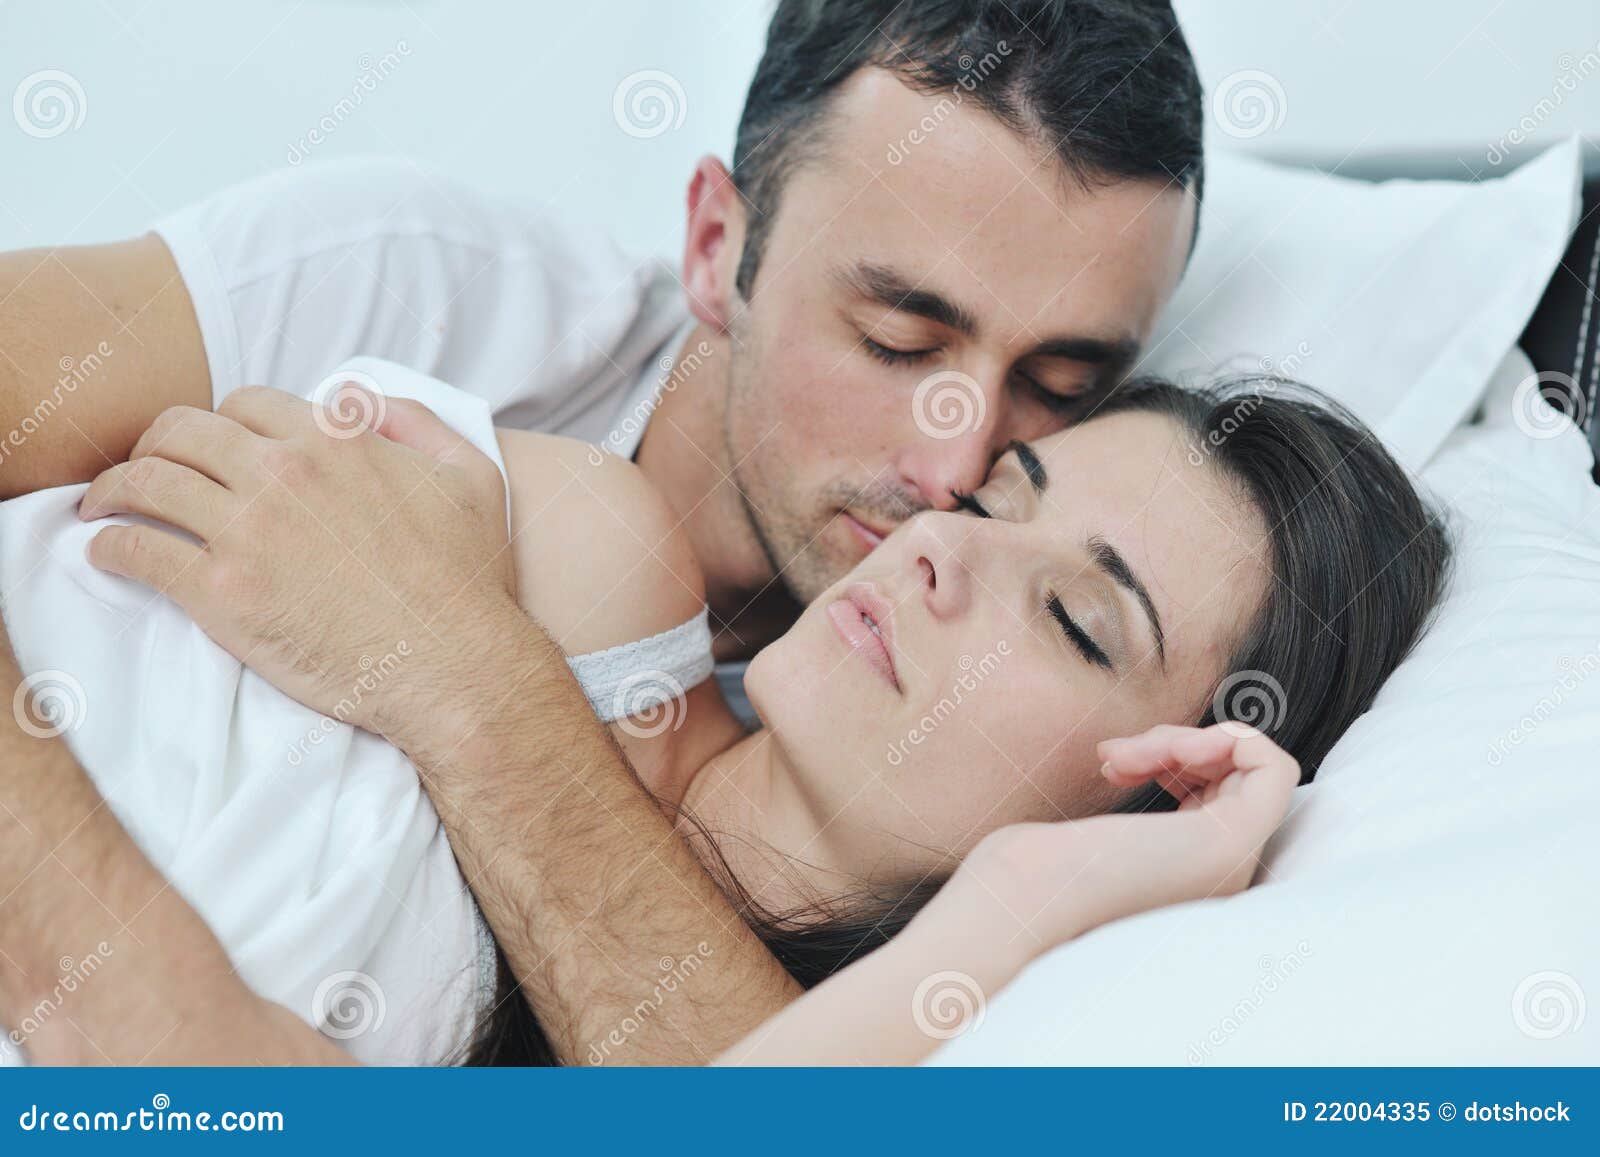 Young Couple Have Good Time In Their Bedroom Royalty Free